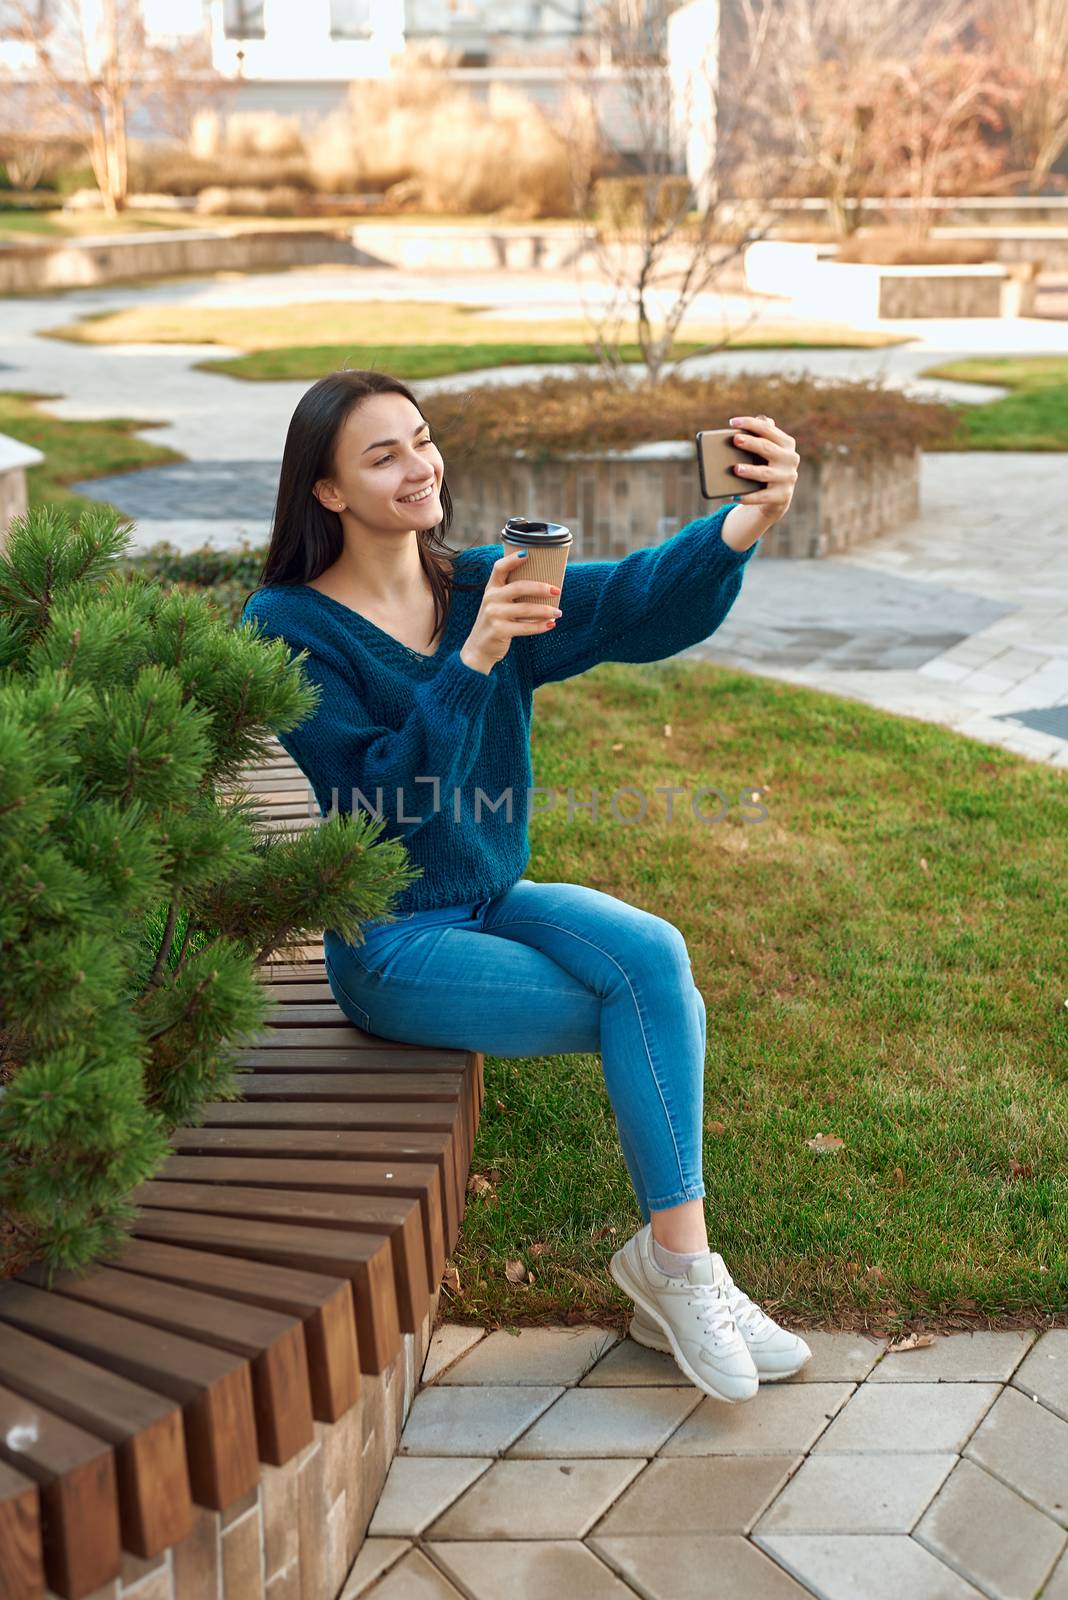 Charming lady posing for selfie on a bench in beautiful square by monakoartstudio